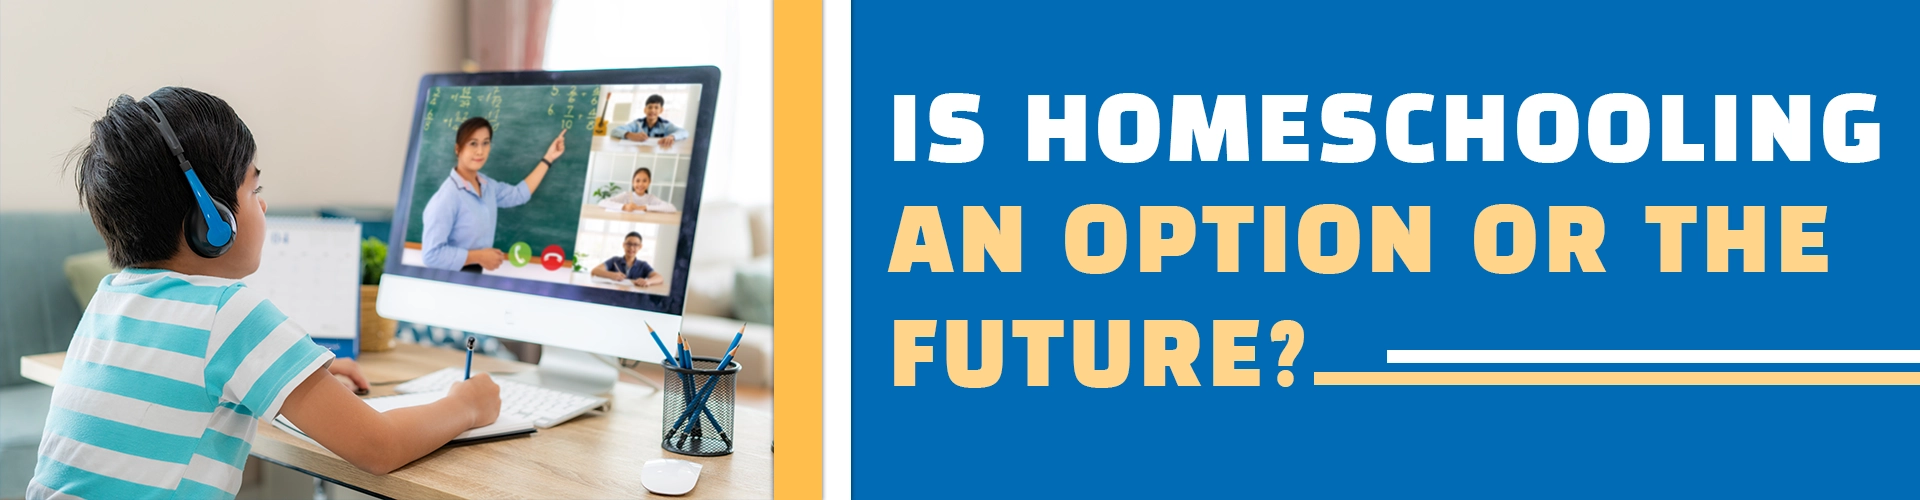 HomeSchooling An Option or the Future